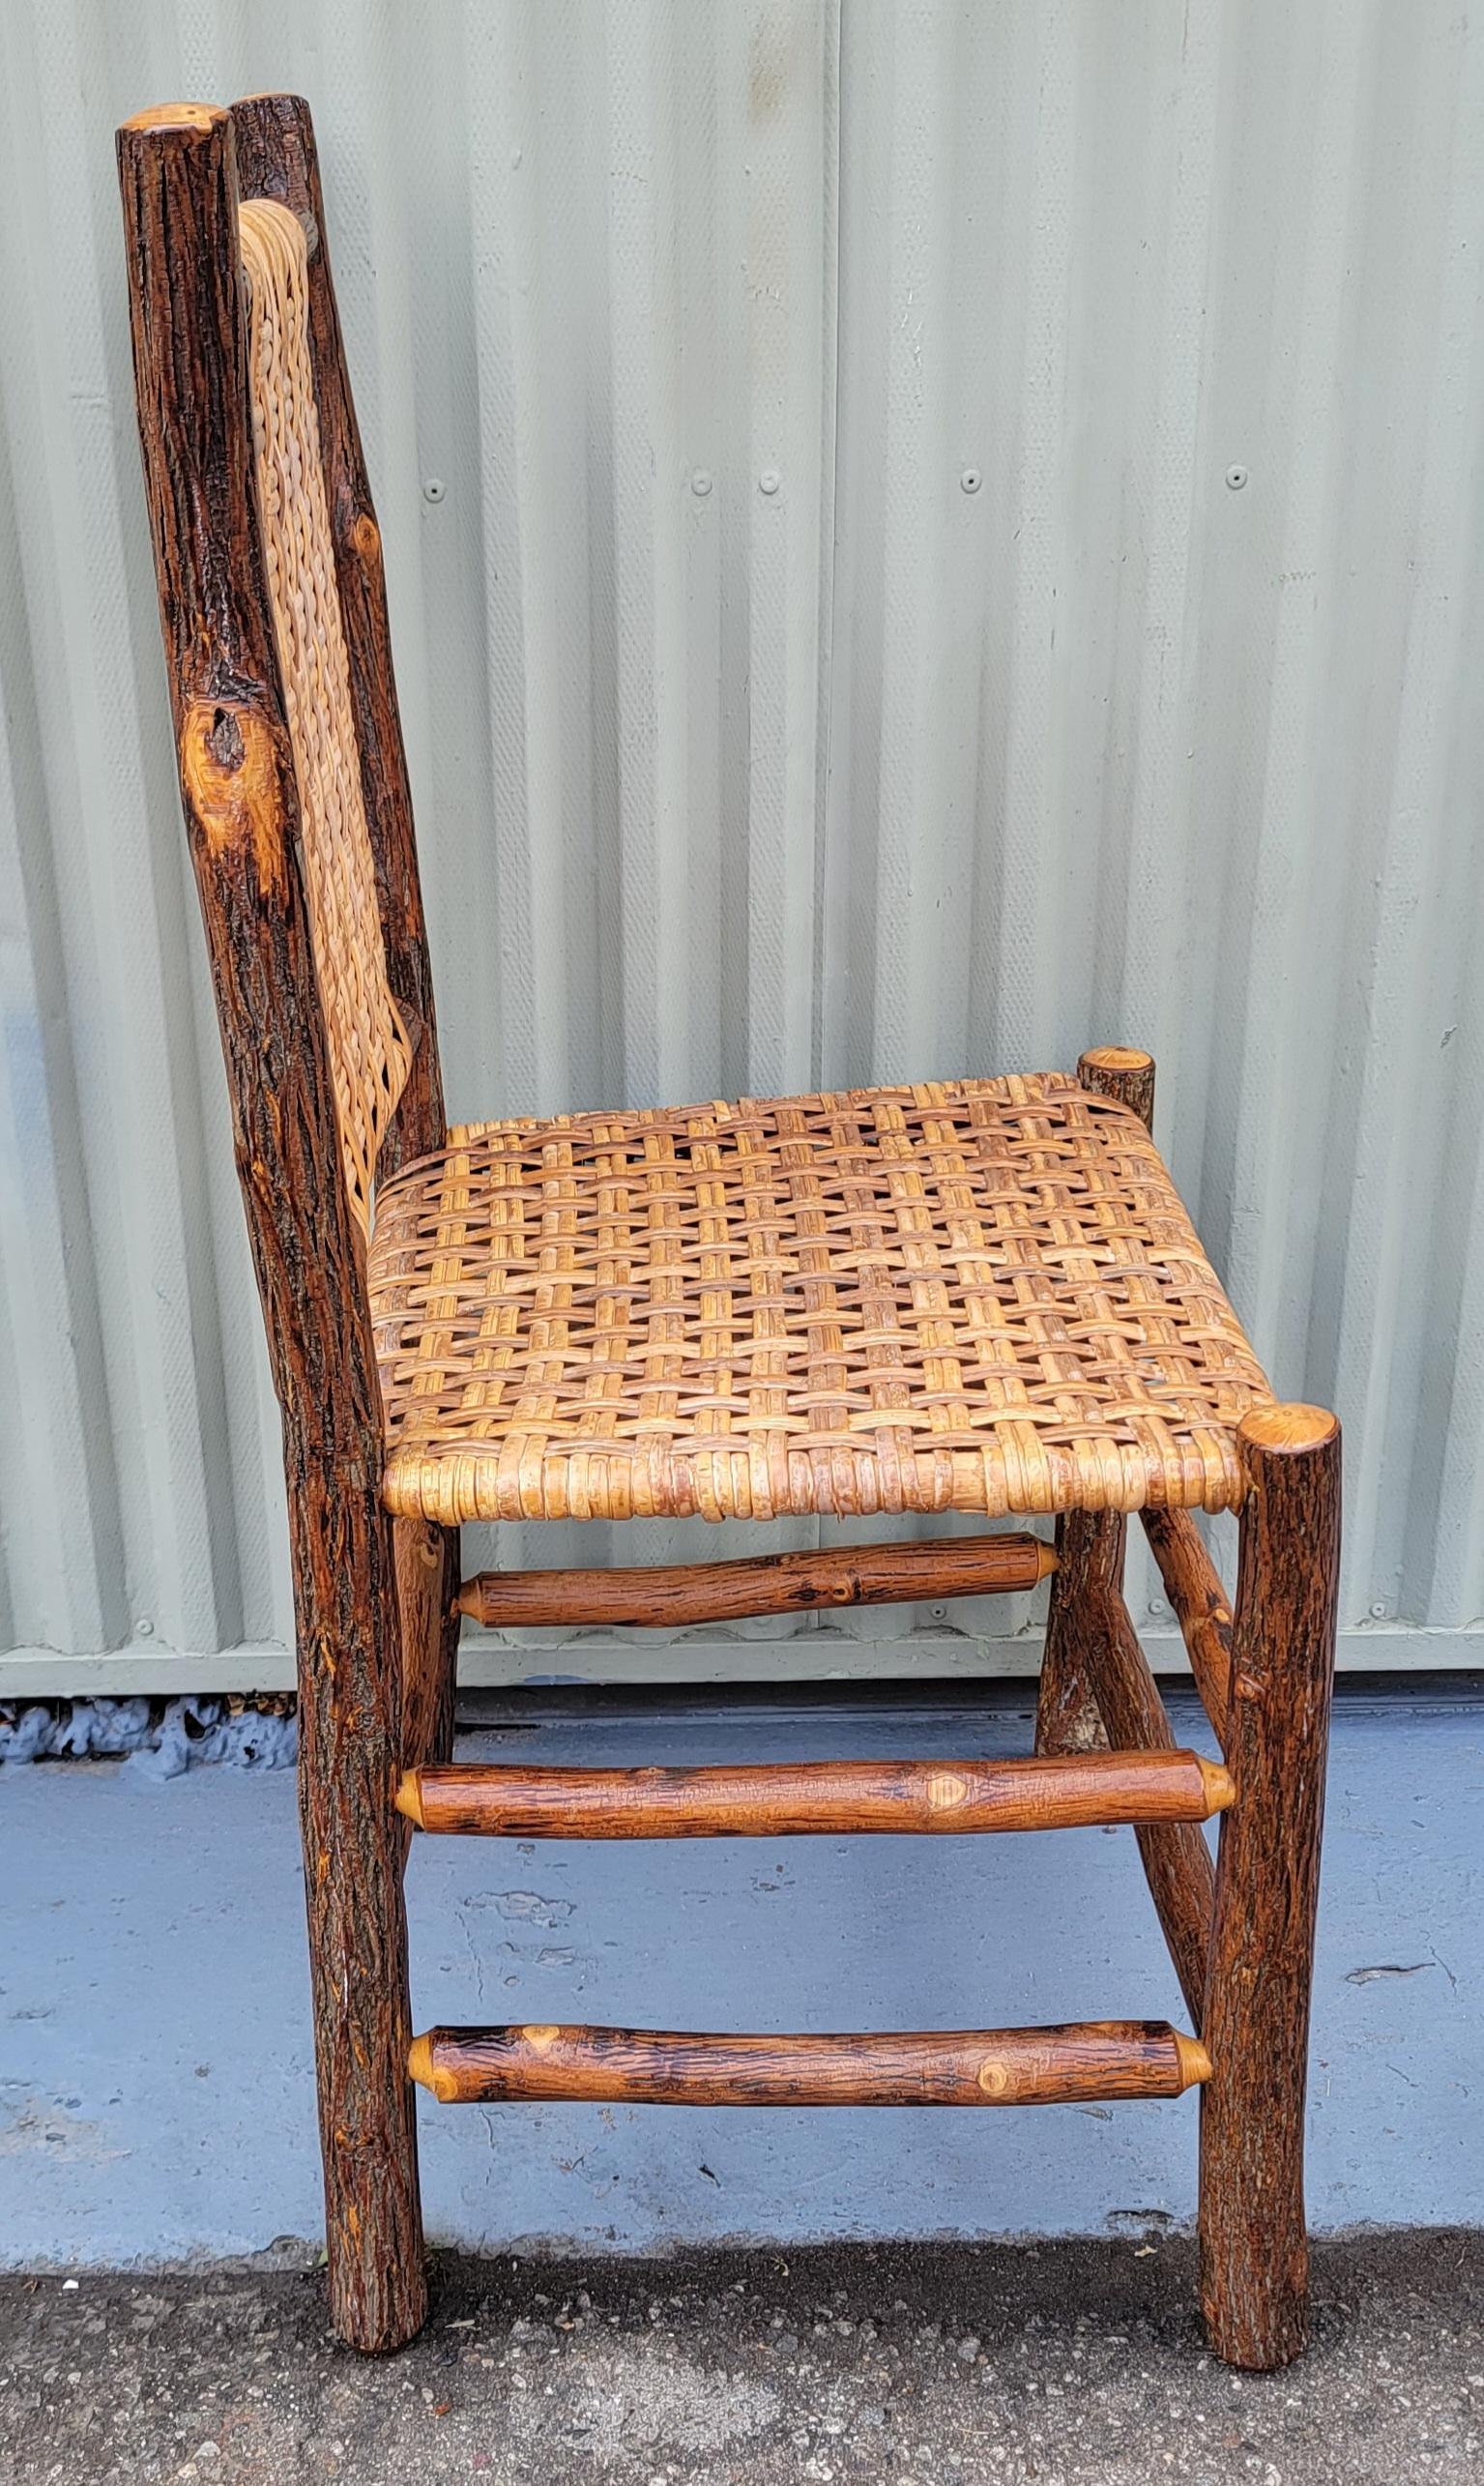 This set of fantastic Old Hickory Chairs were a custom made order for a client in Montana on a ranch and were a custom order. They were made super strong and tighter & thicker weave seats & backs. Wonderful original aged patina on the hickory. The